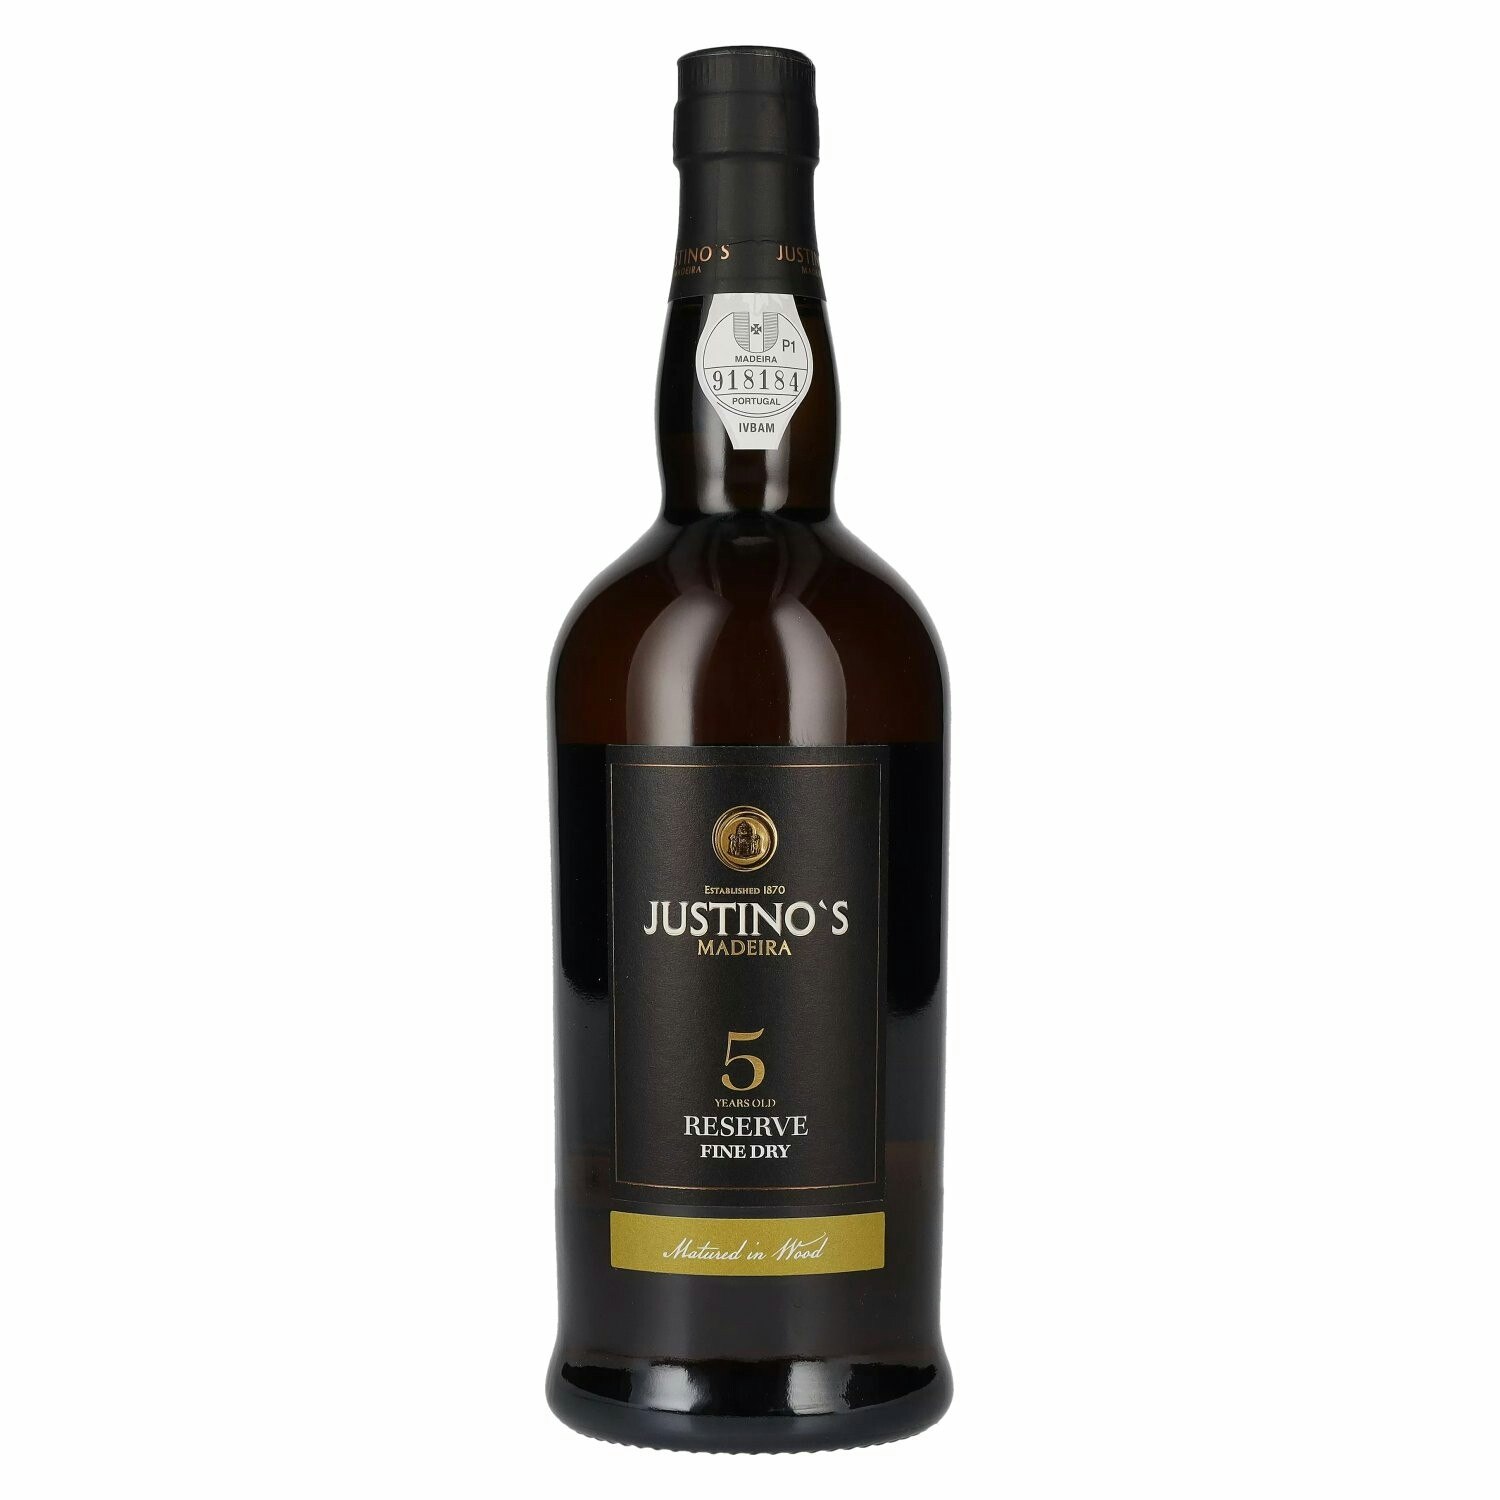 Justino's Madeira 5 Years Old RESERVE FINE DRY 19% Vol. 0,75l